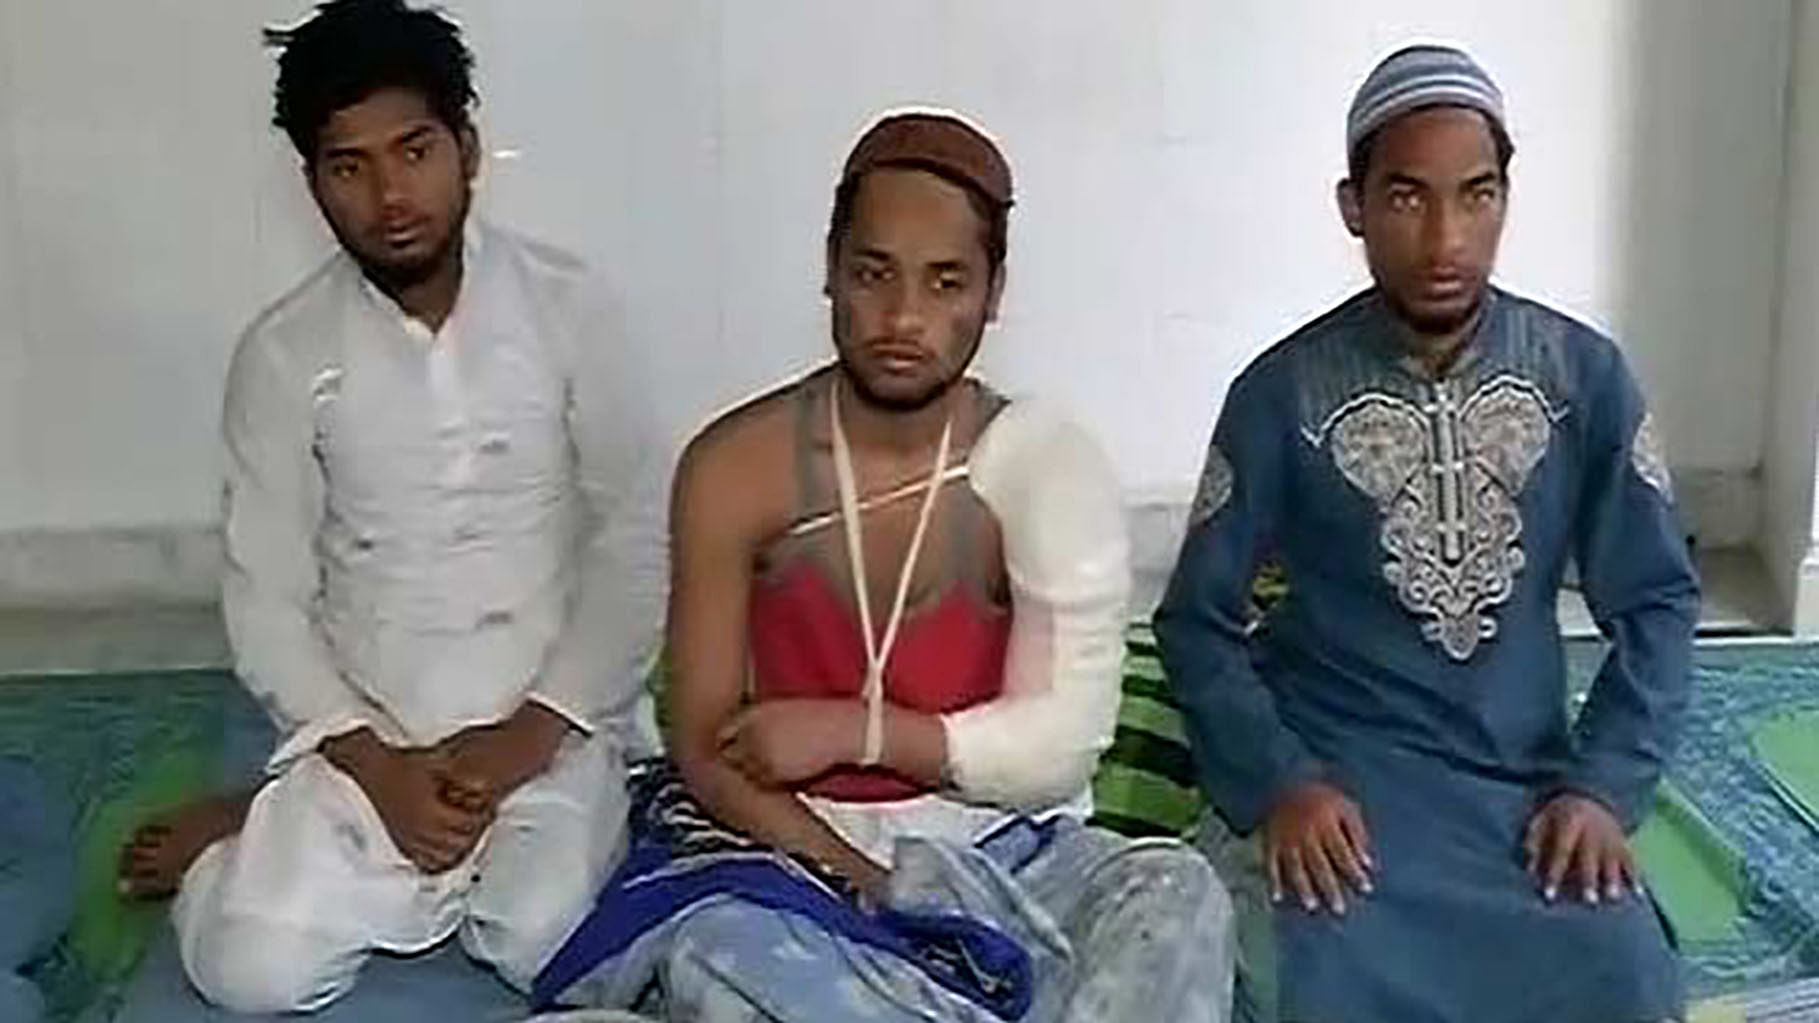 The three youths who were attacked. (Photo: ANI)